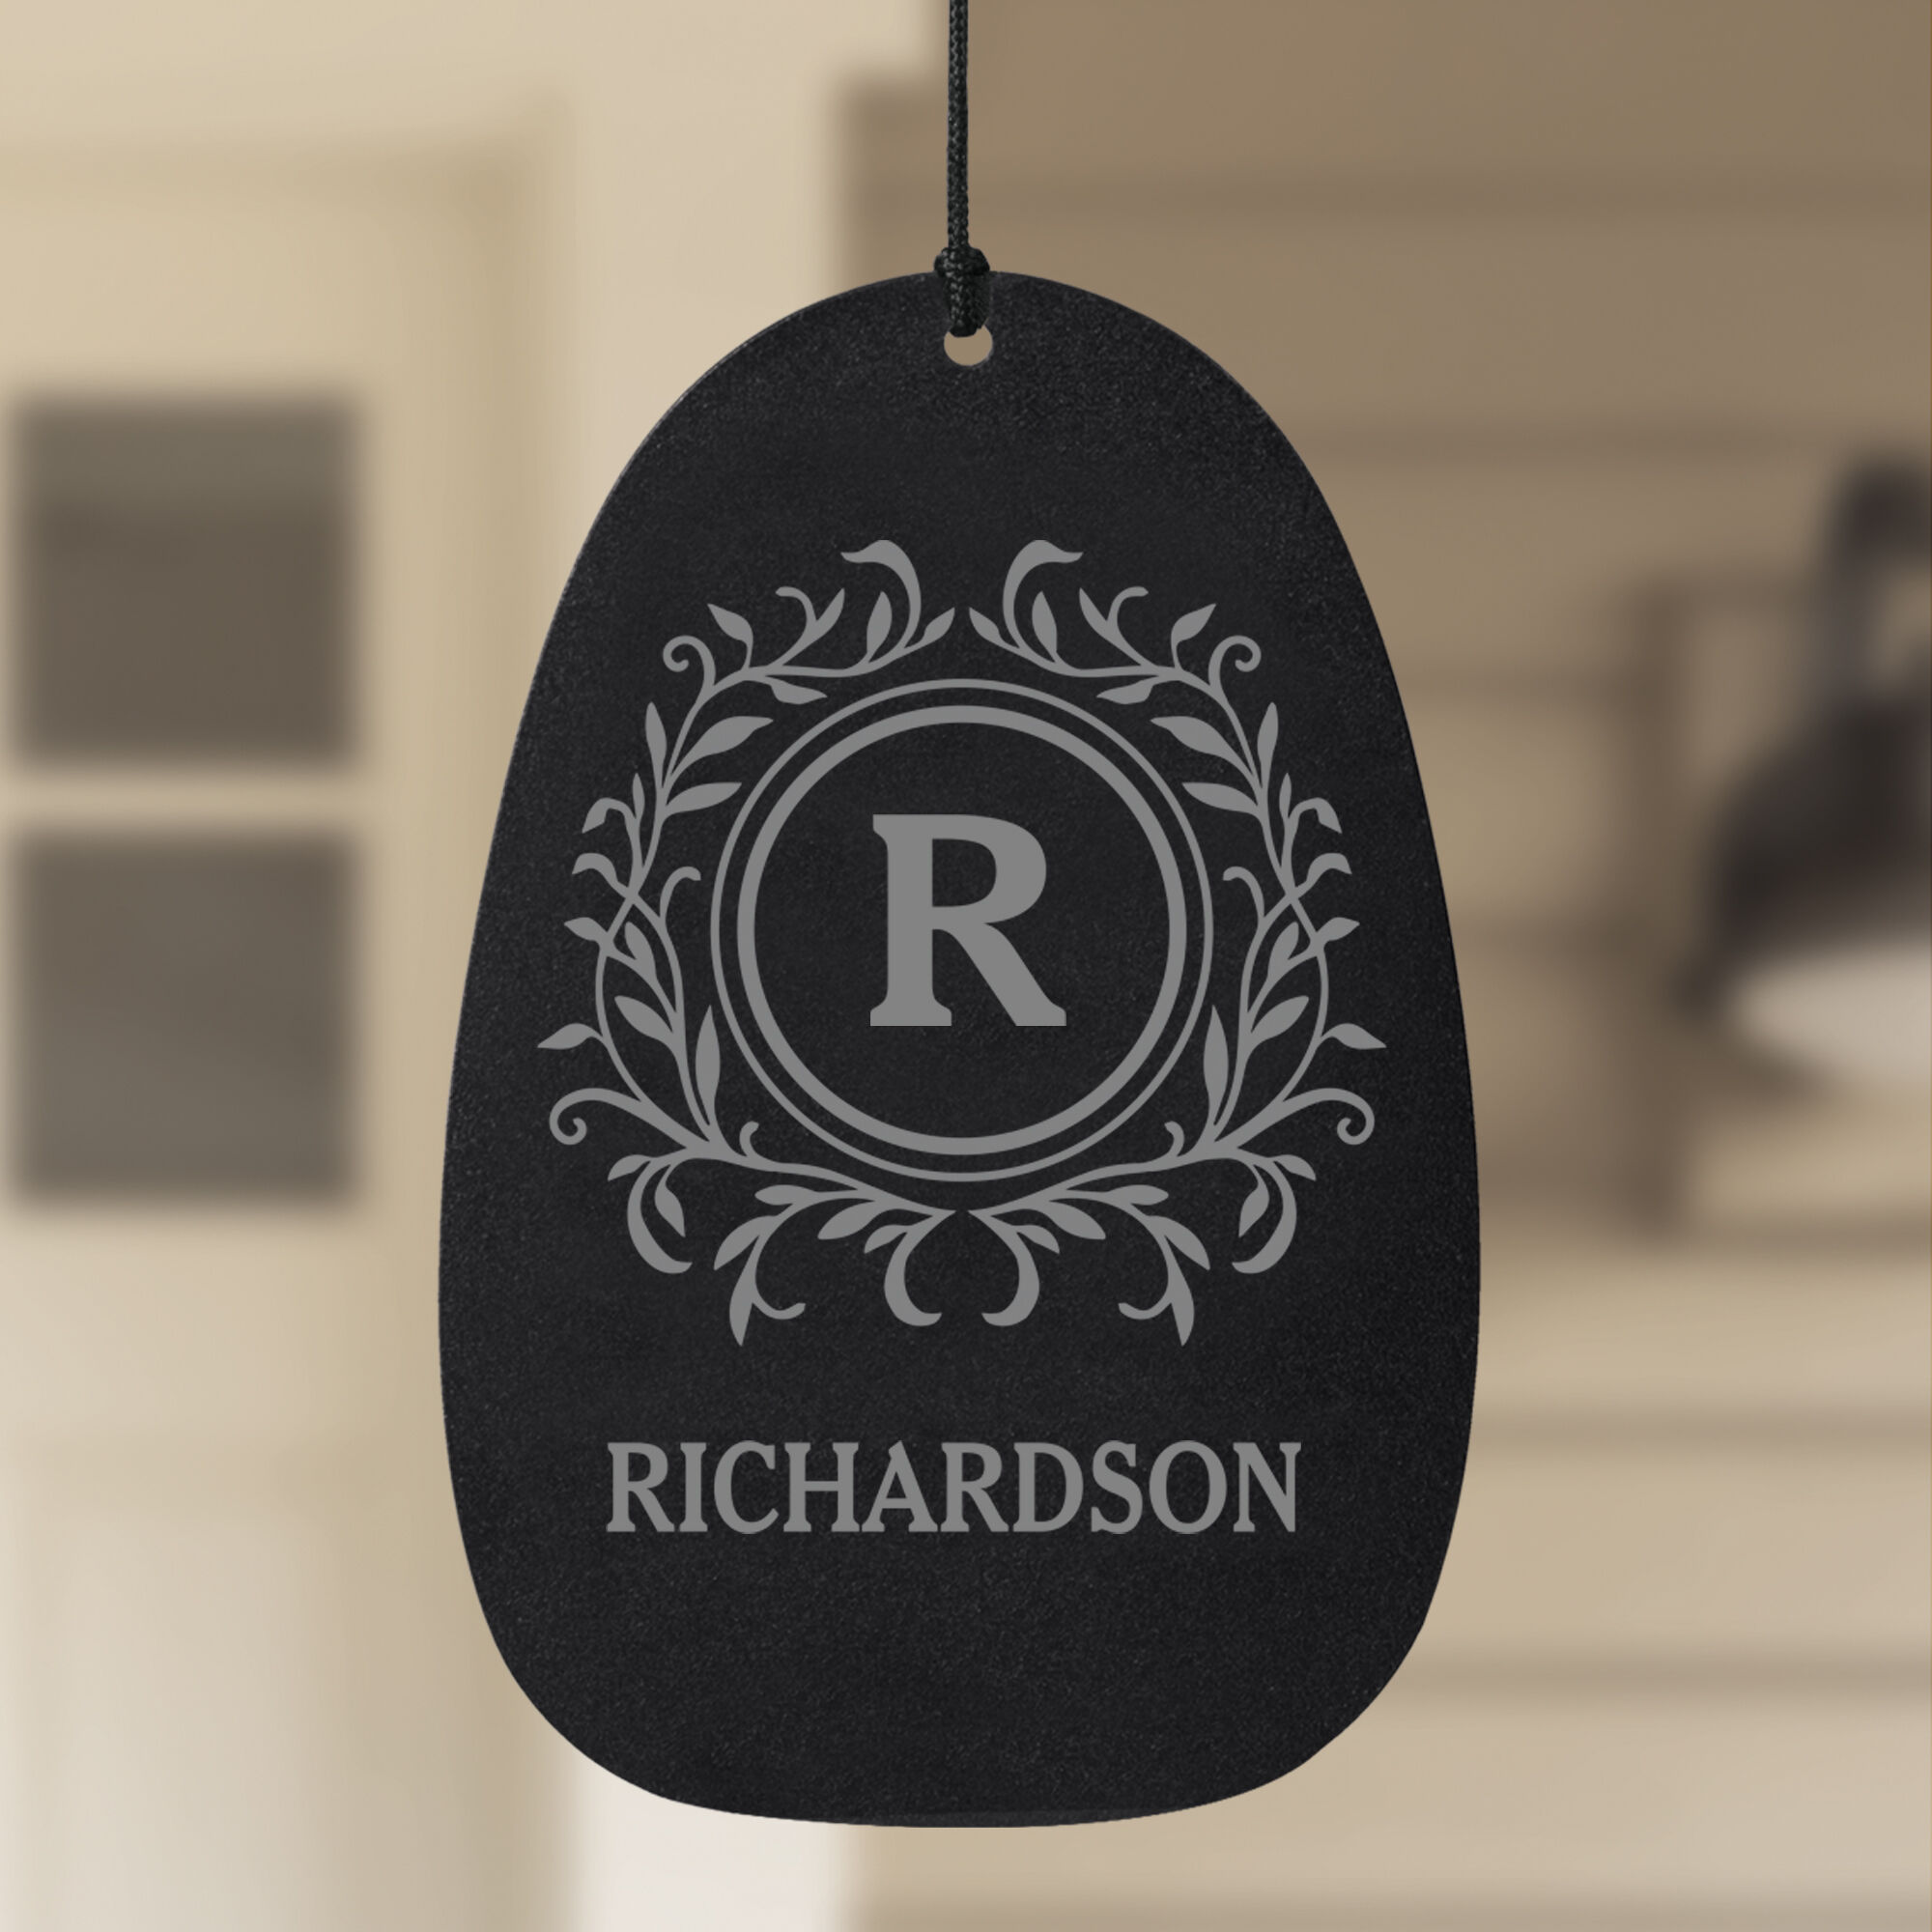 The Personalized Wind Chime 10245 0038 b personalization